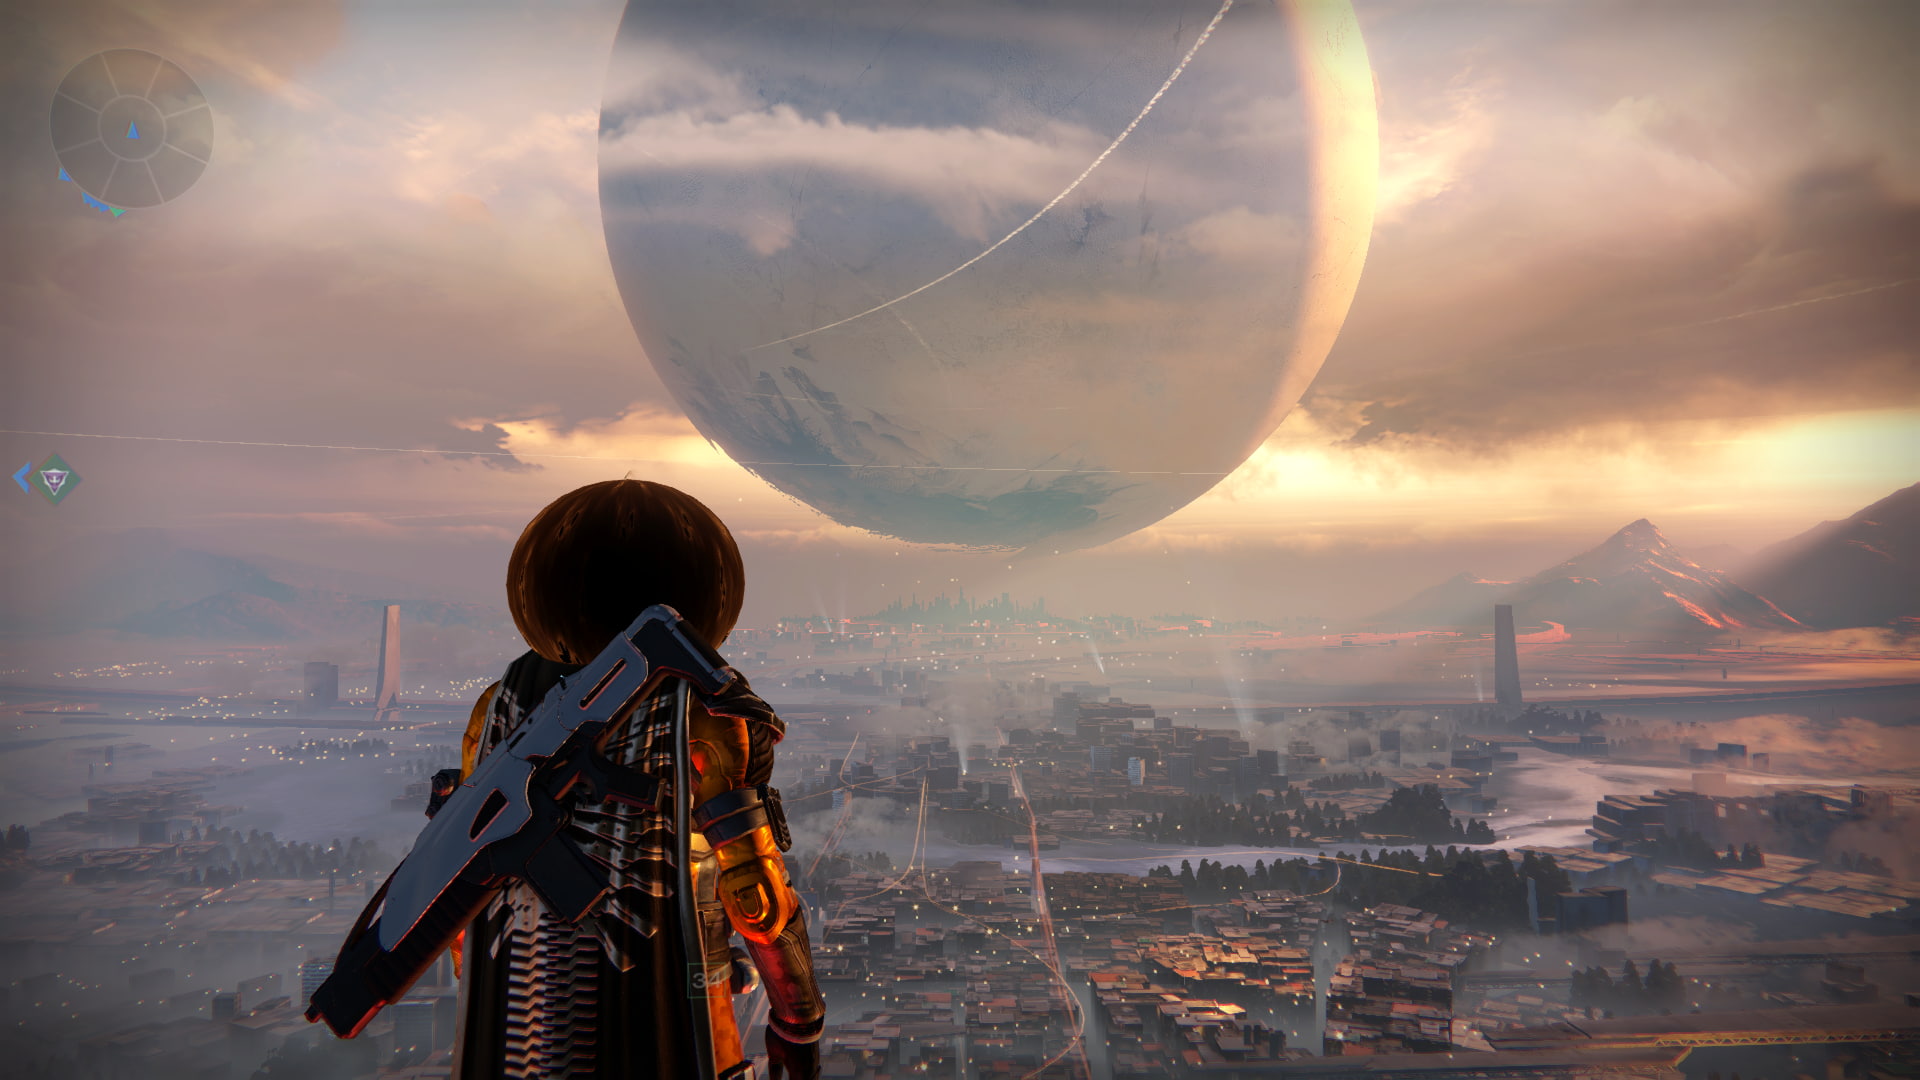 Destiny 2, Bungie, sky, one person, real people, building exterior